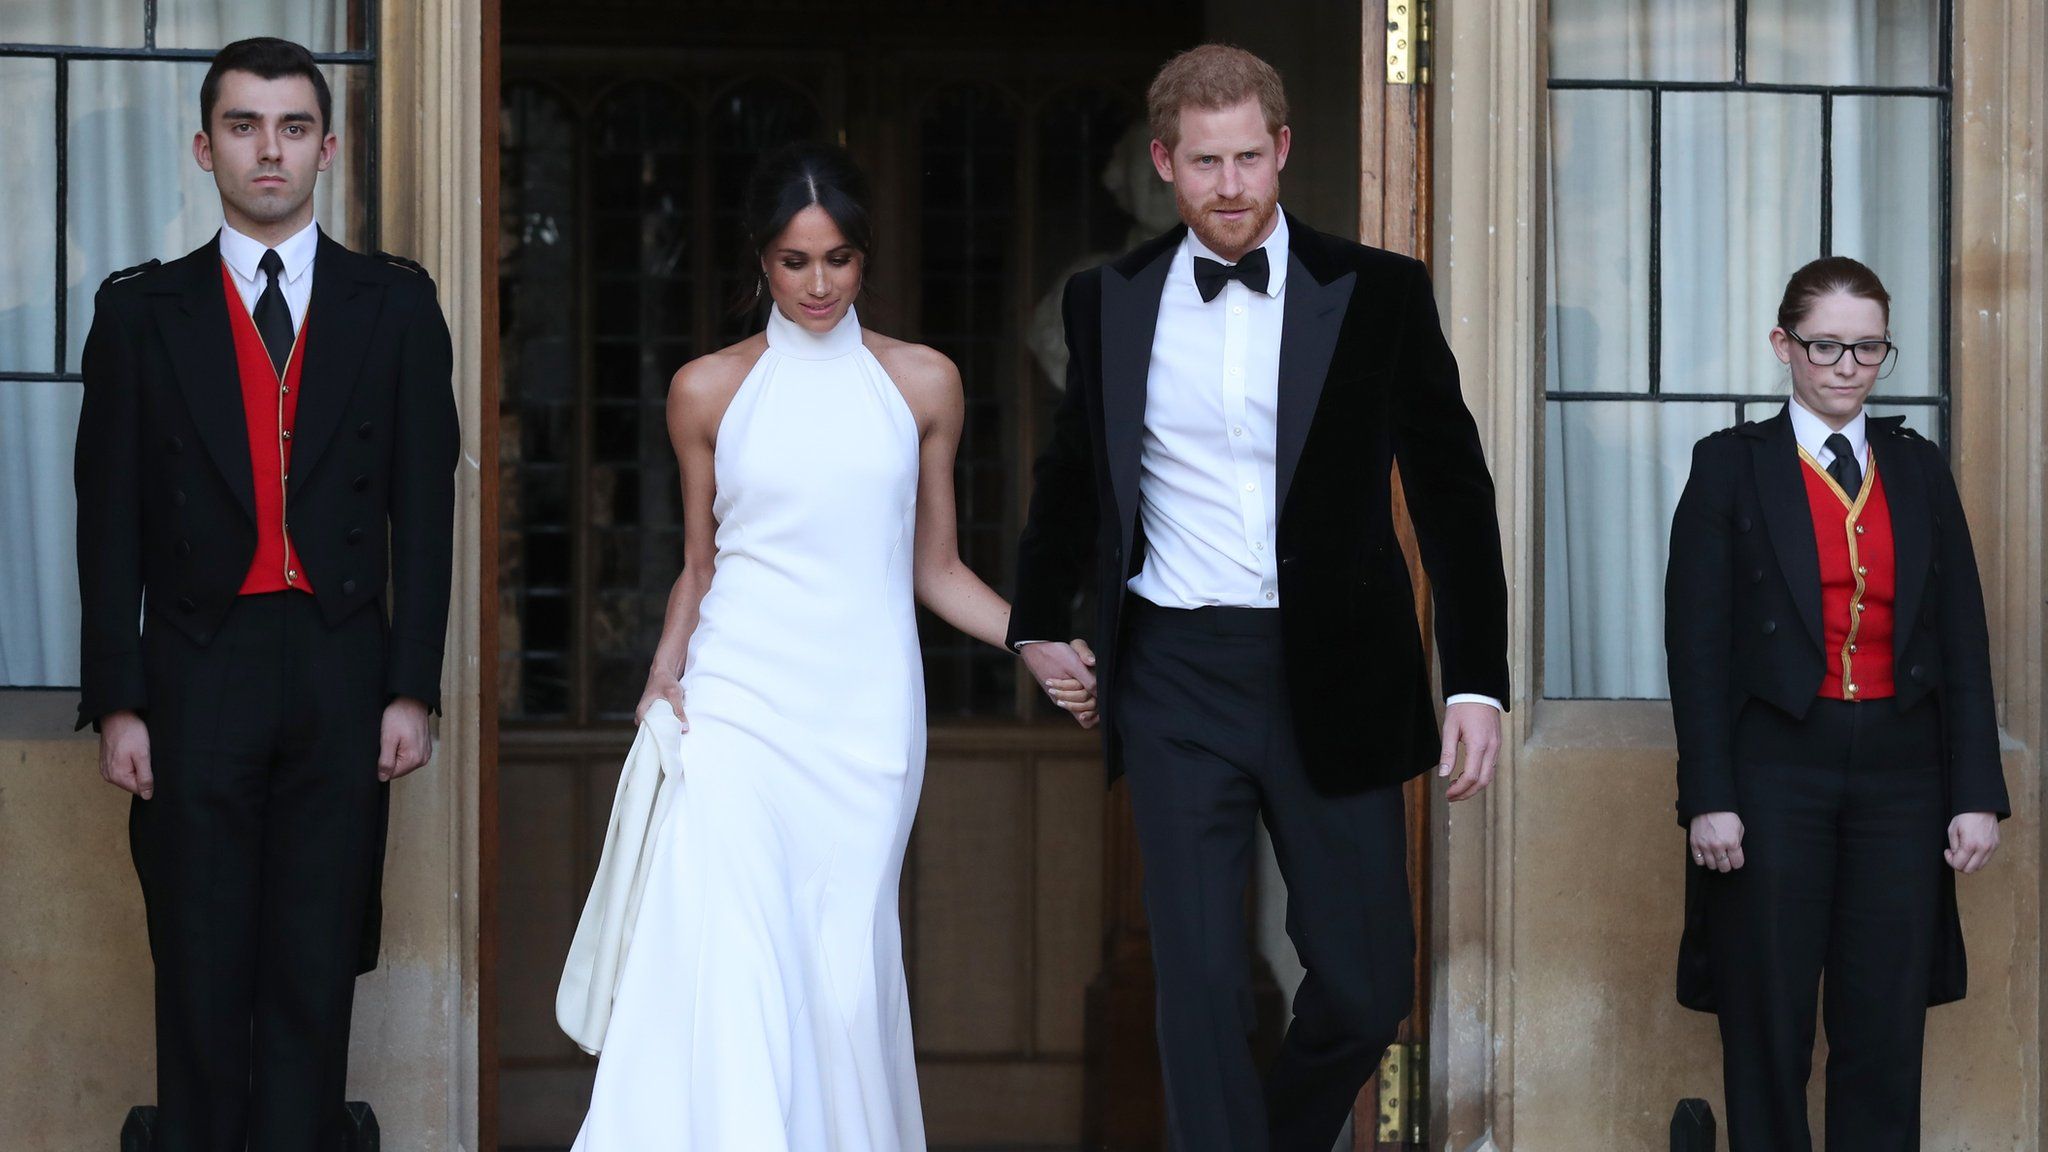 Harry and Meghan leave for their evening reception